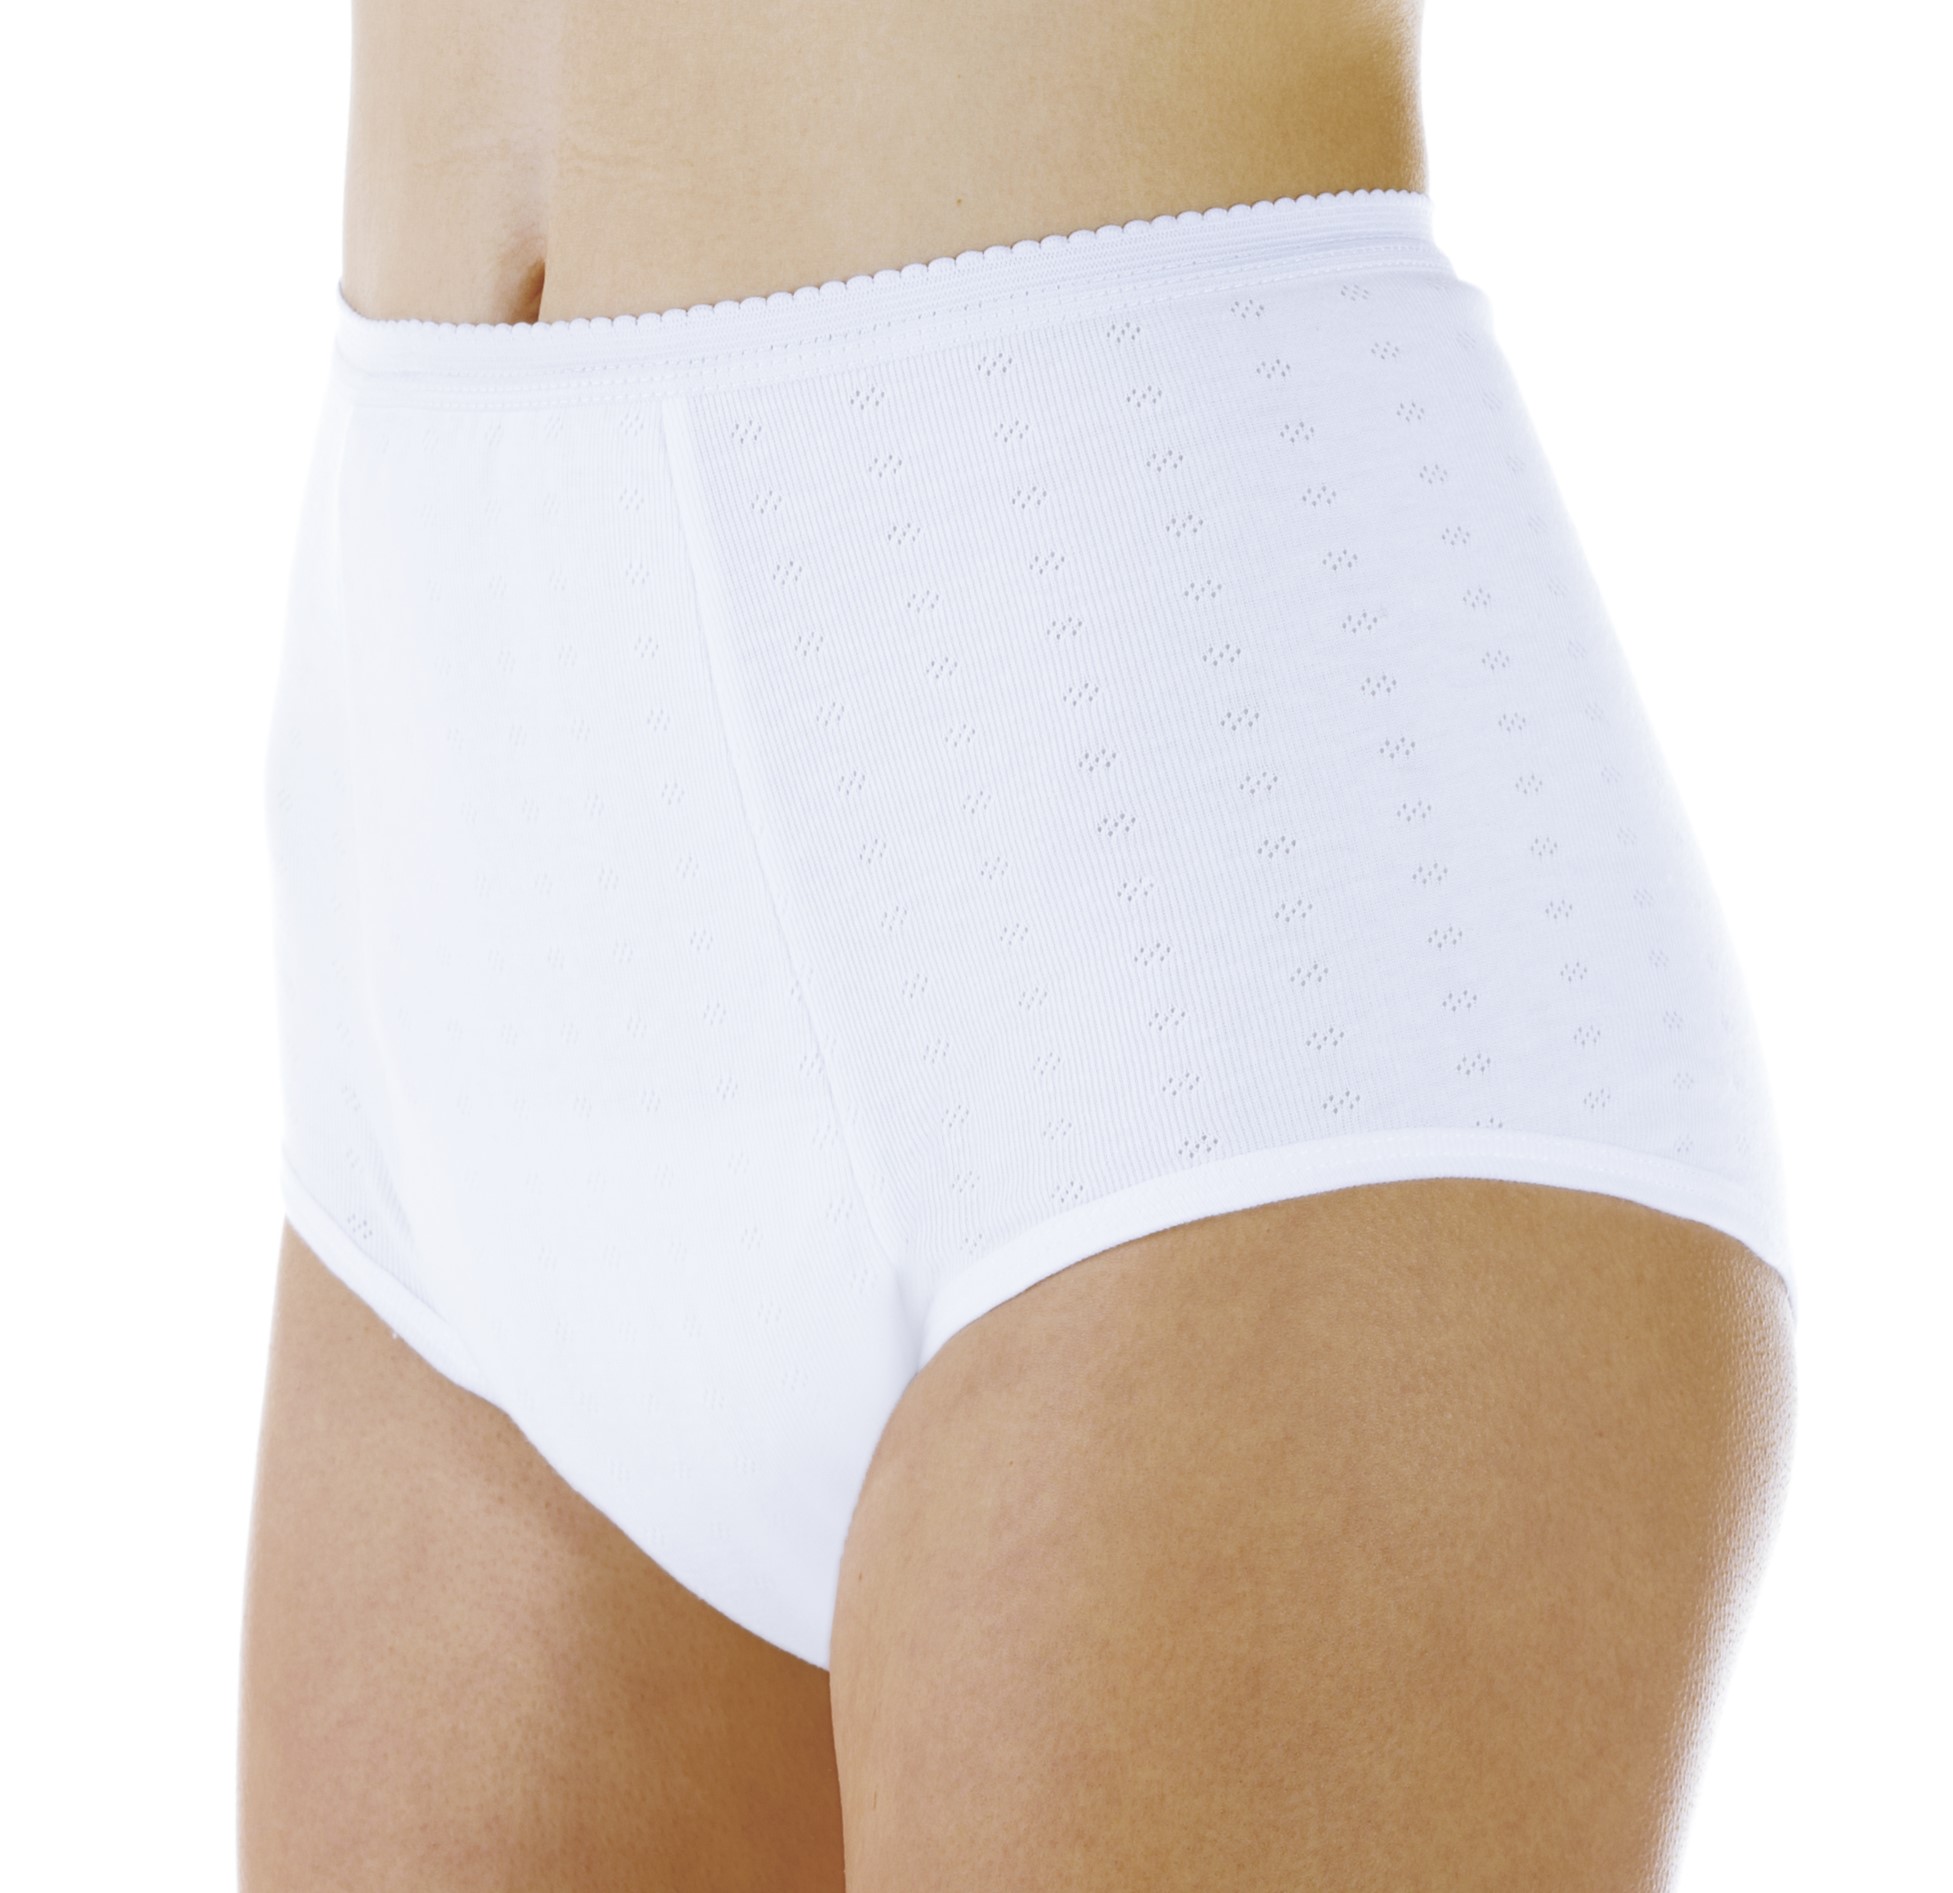 Wearever Women's Smooth and Silky Incontinence Panties, High Leg Briefs,  Light Absorbency, White, Medium, Pack of 3